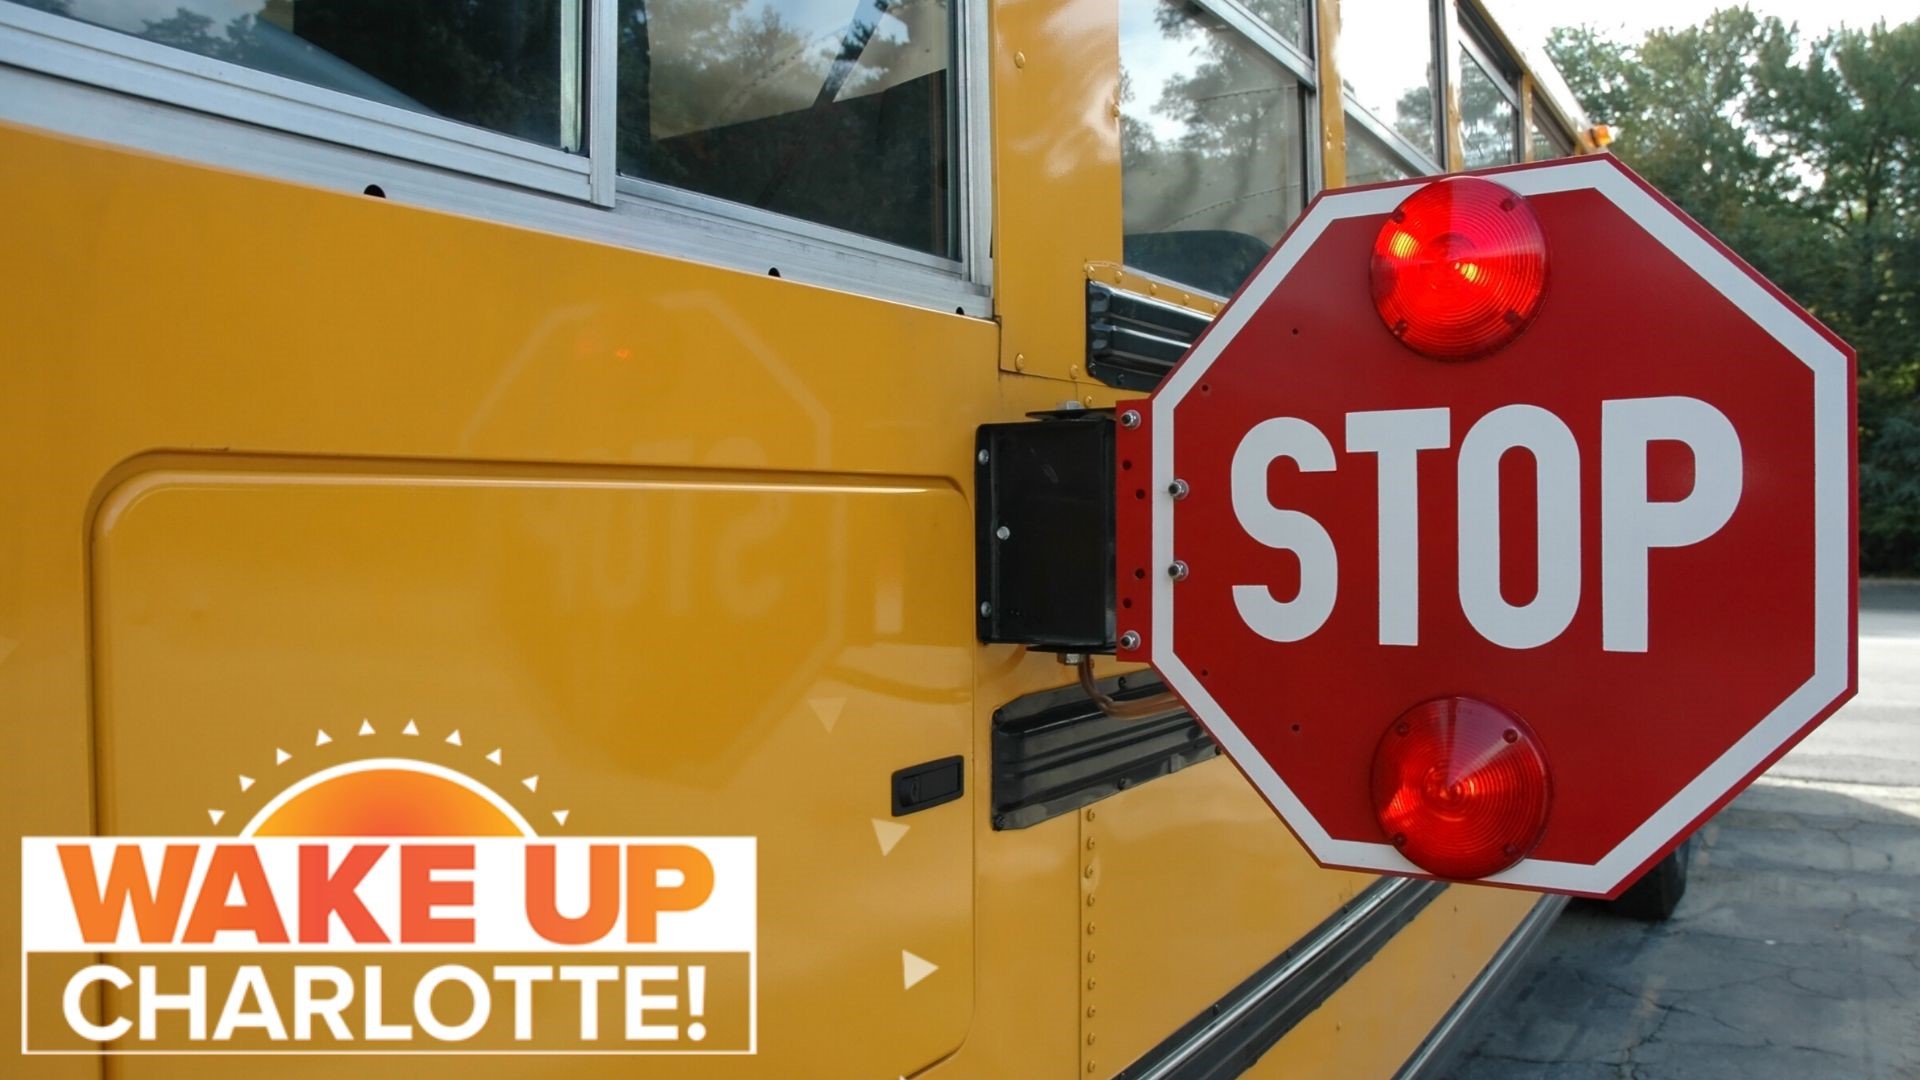 Lawmakers in South Carolina are expected to propose increasing the penalty for drivers who pass a stopped school bus, including up to six months in jail.